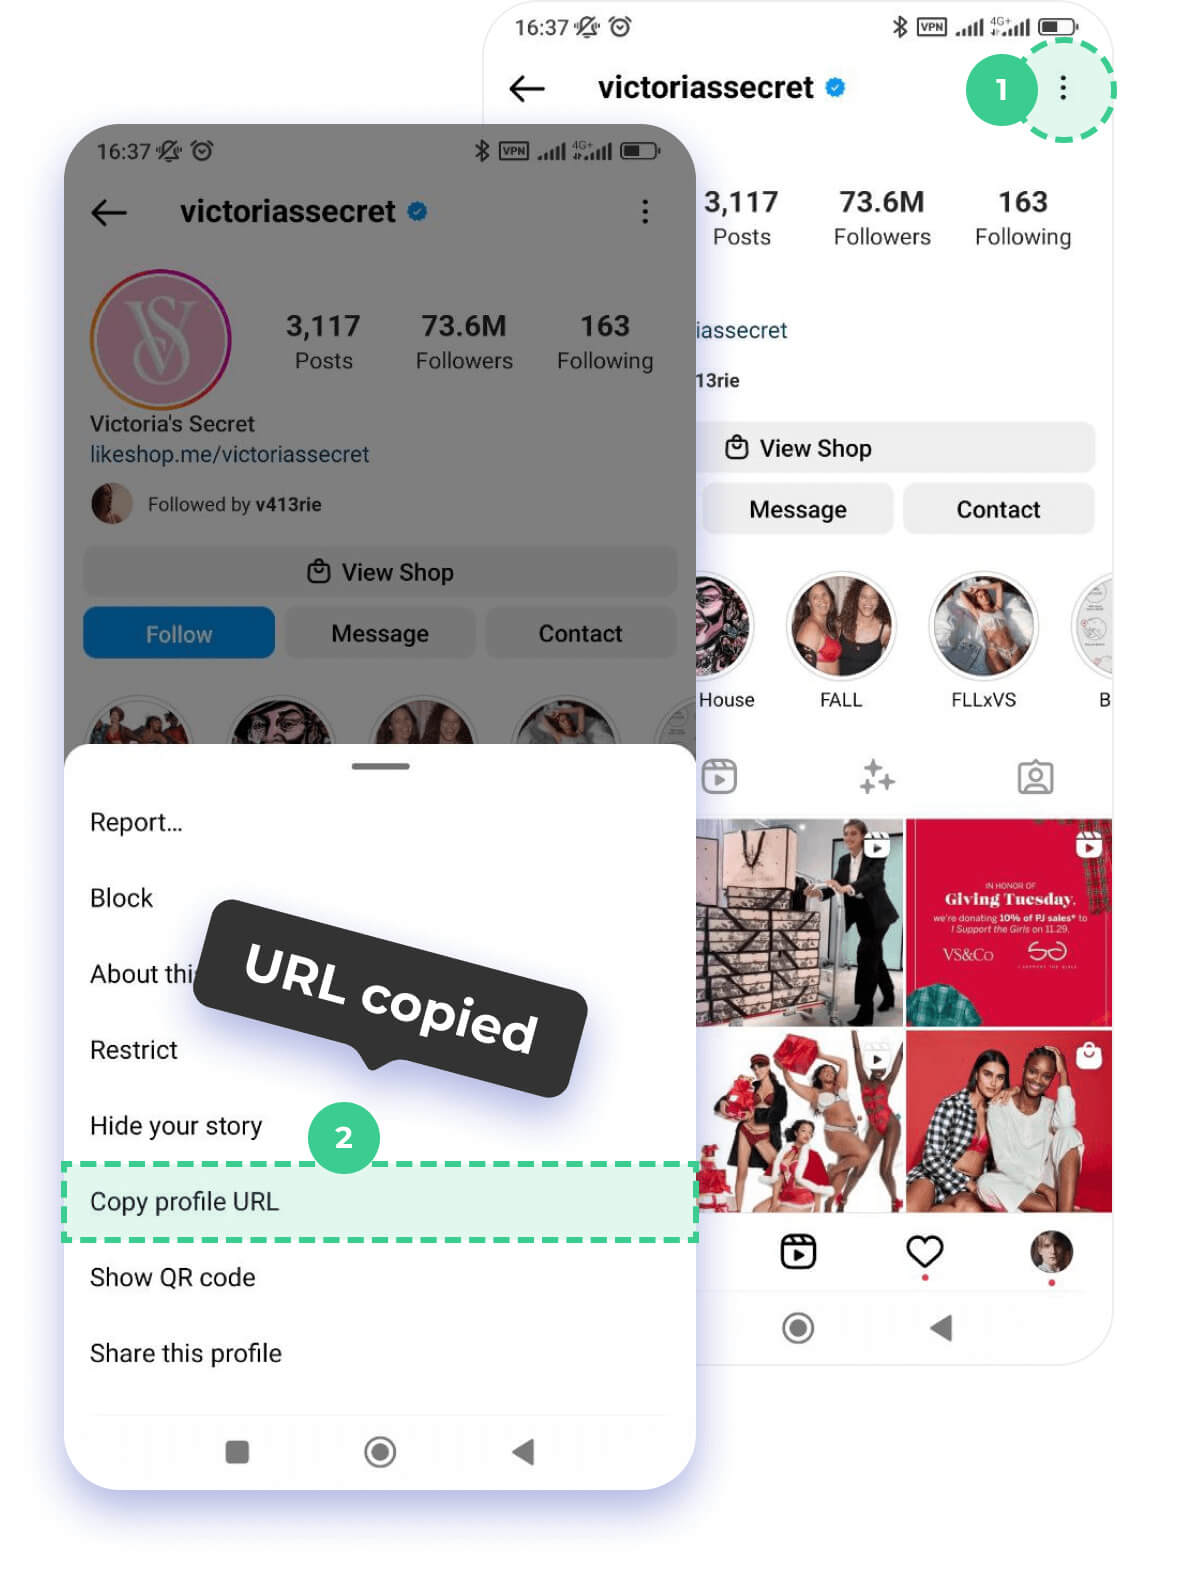 How to use the online viewer for Instagram?